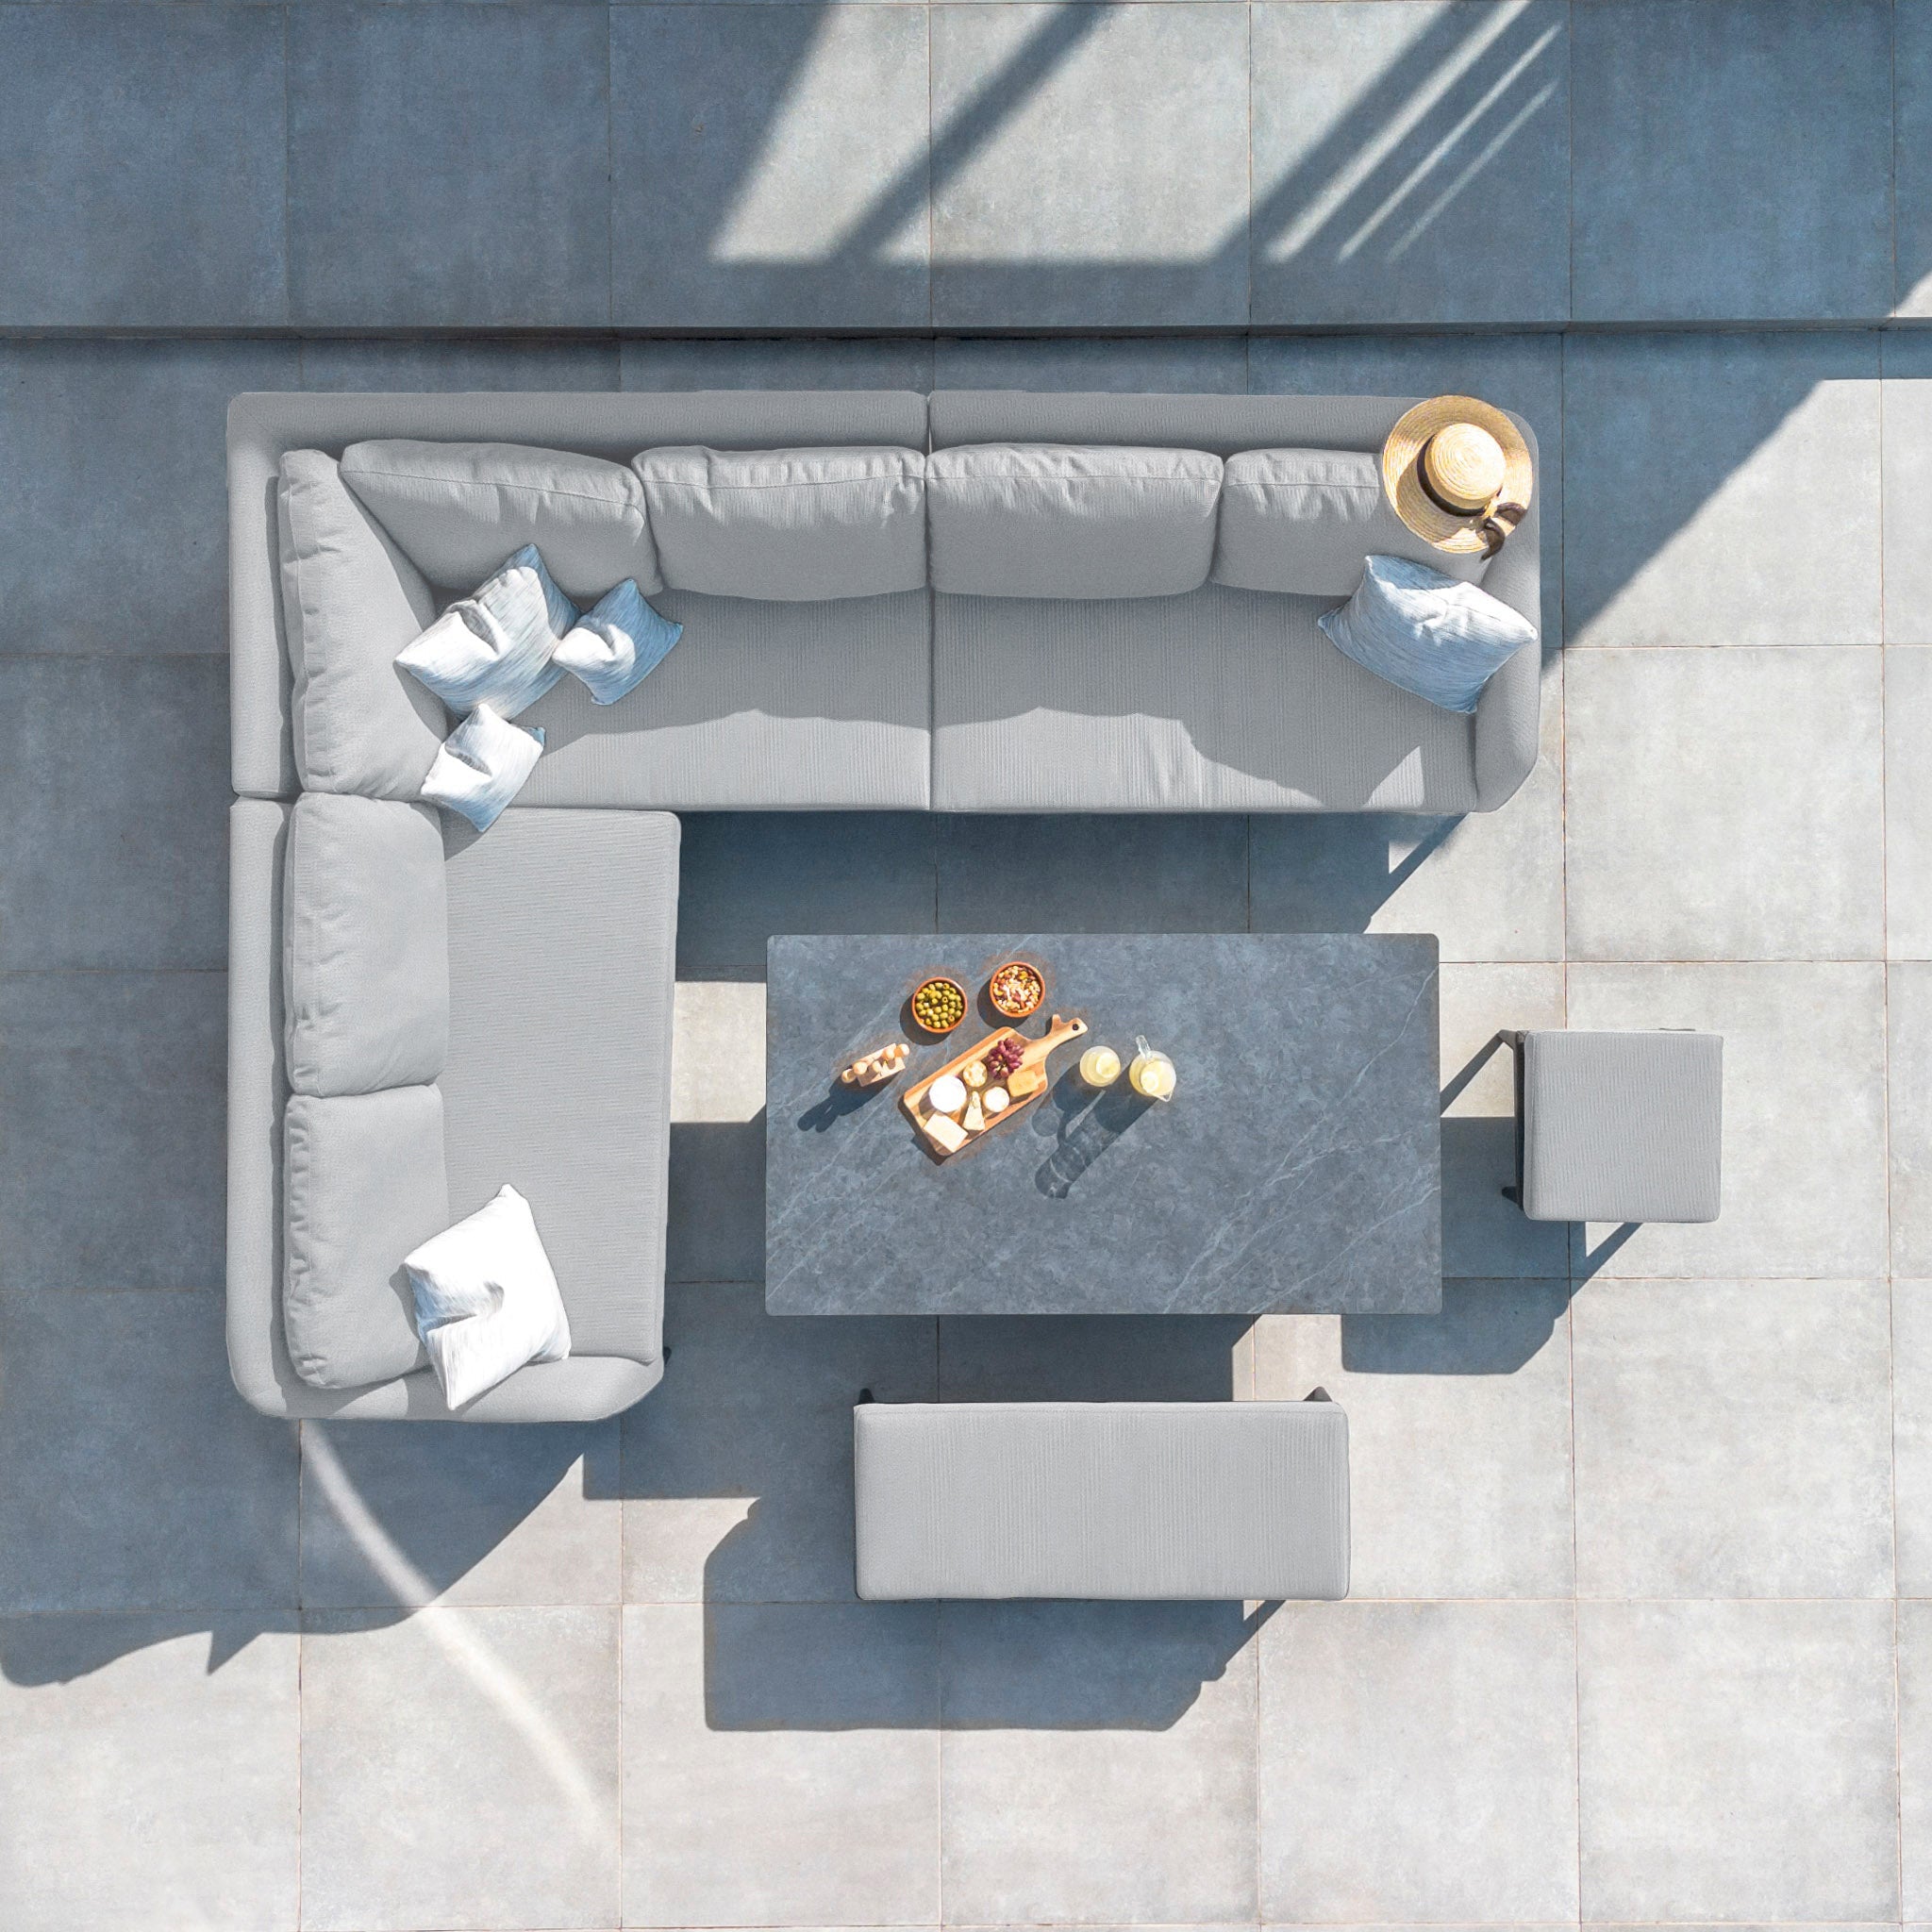 Luna Outdoor Fabric Rectangular Corner Dining Set with Rising Table in Oyster Grey (Left Hand)